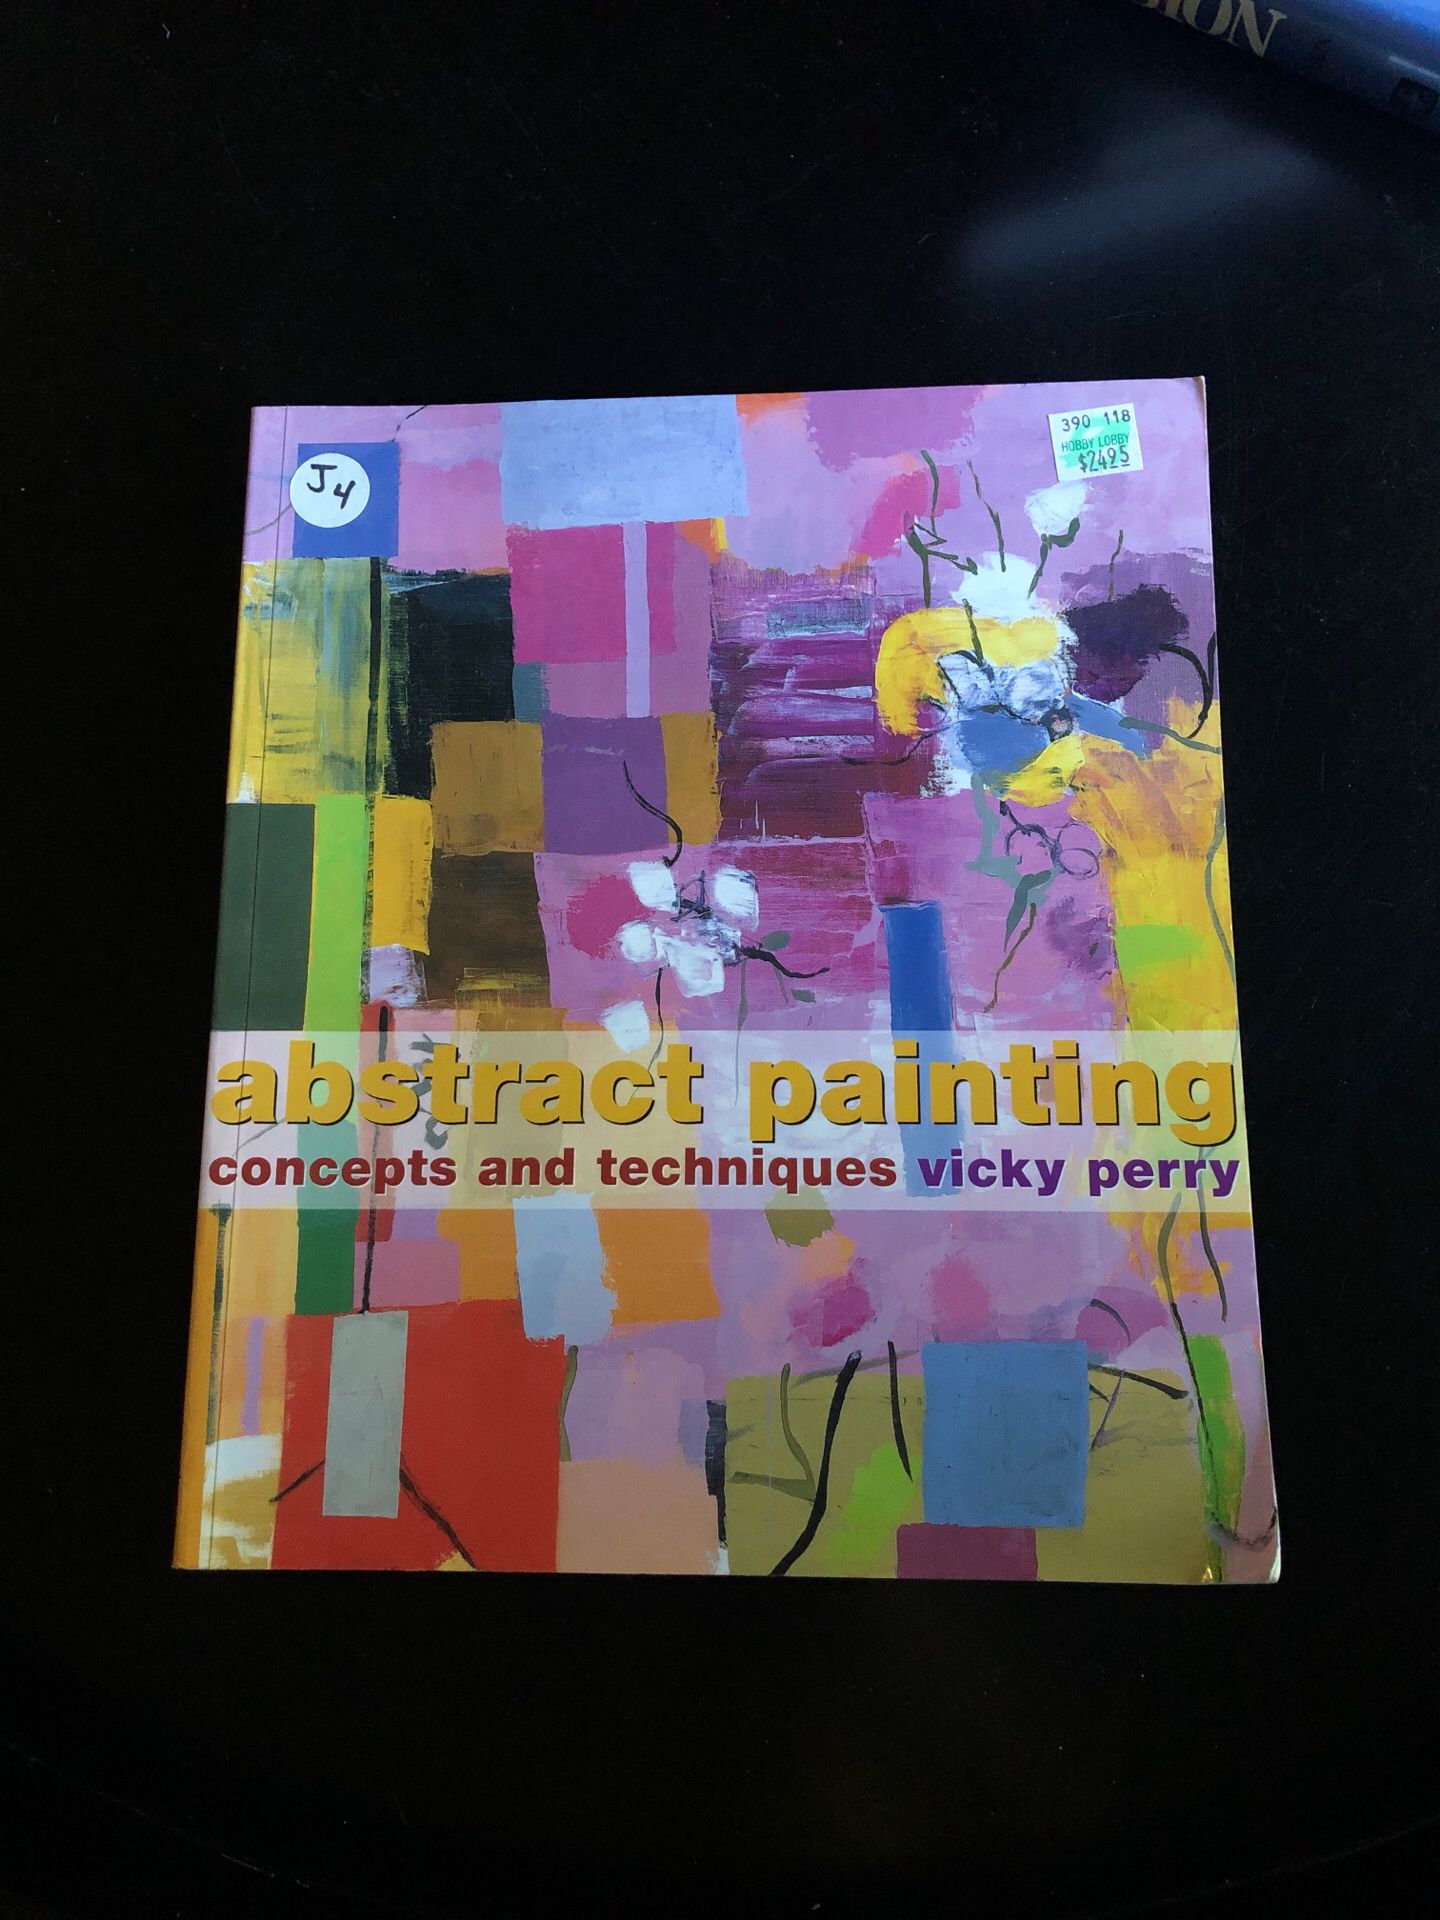 Art book - abstract painting by Vicky perry